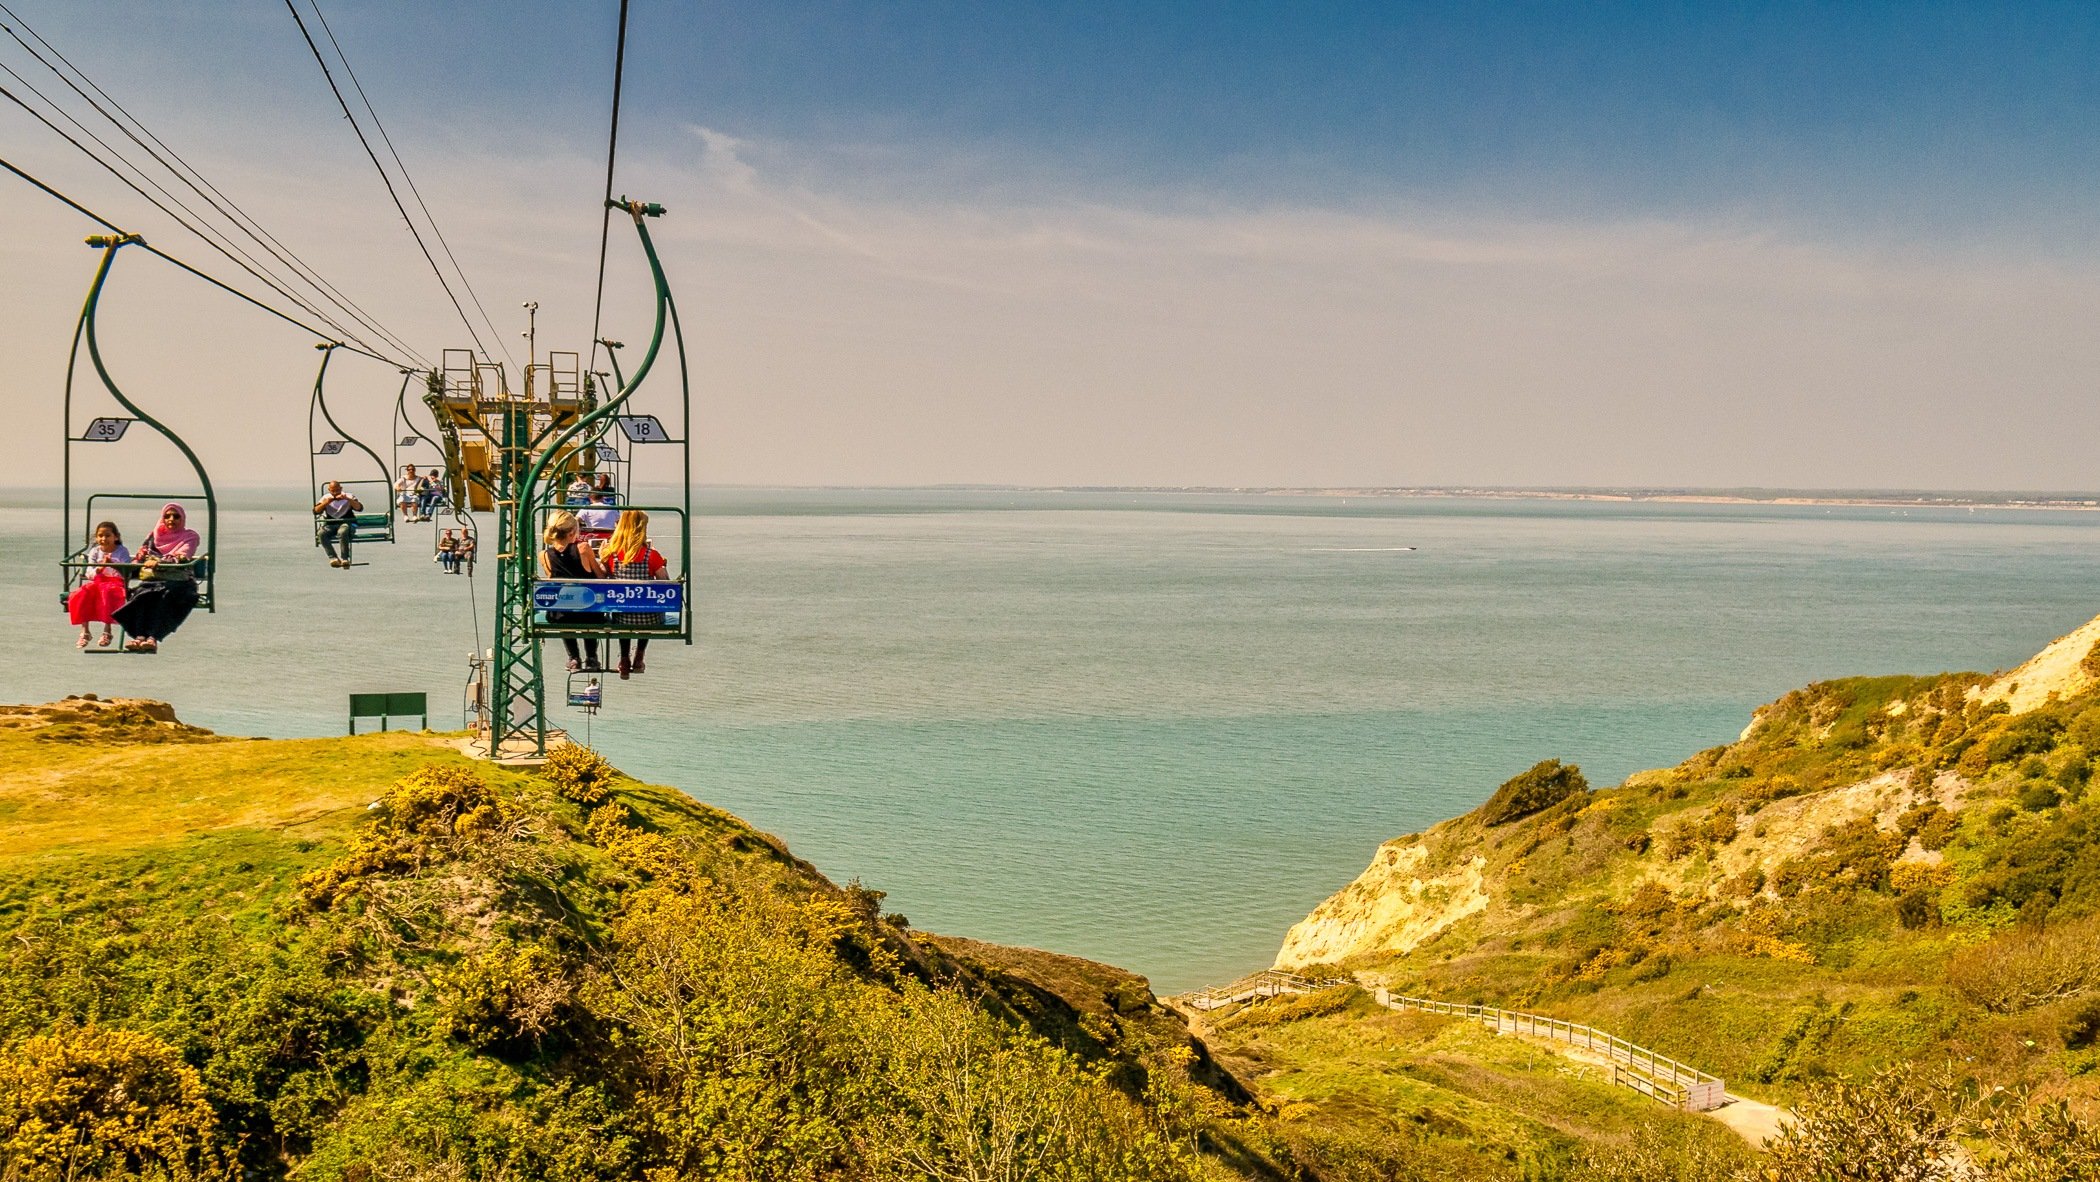 Chairlift at the Needles